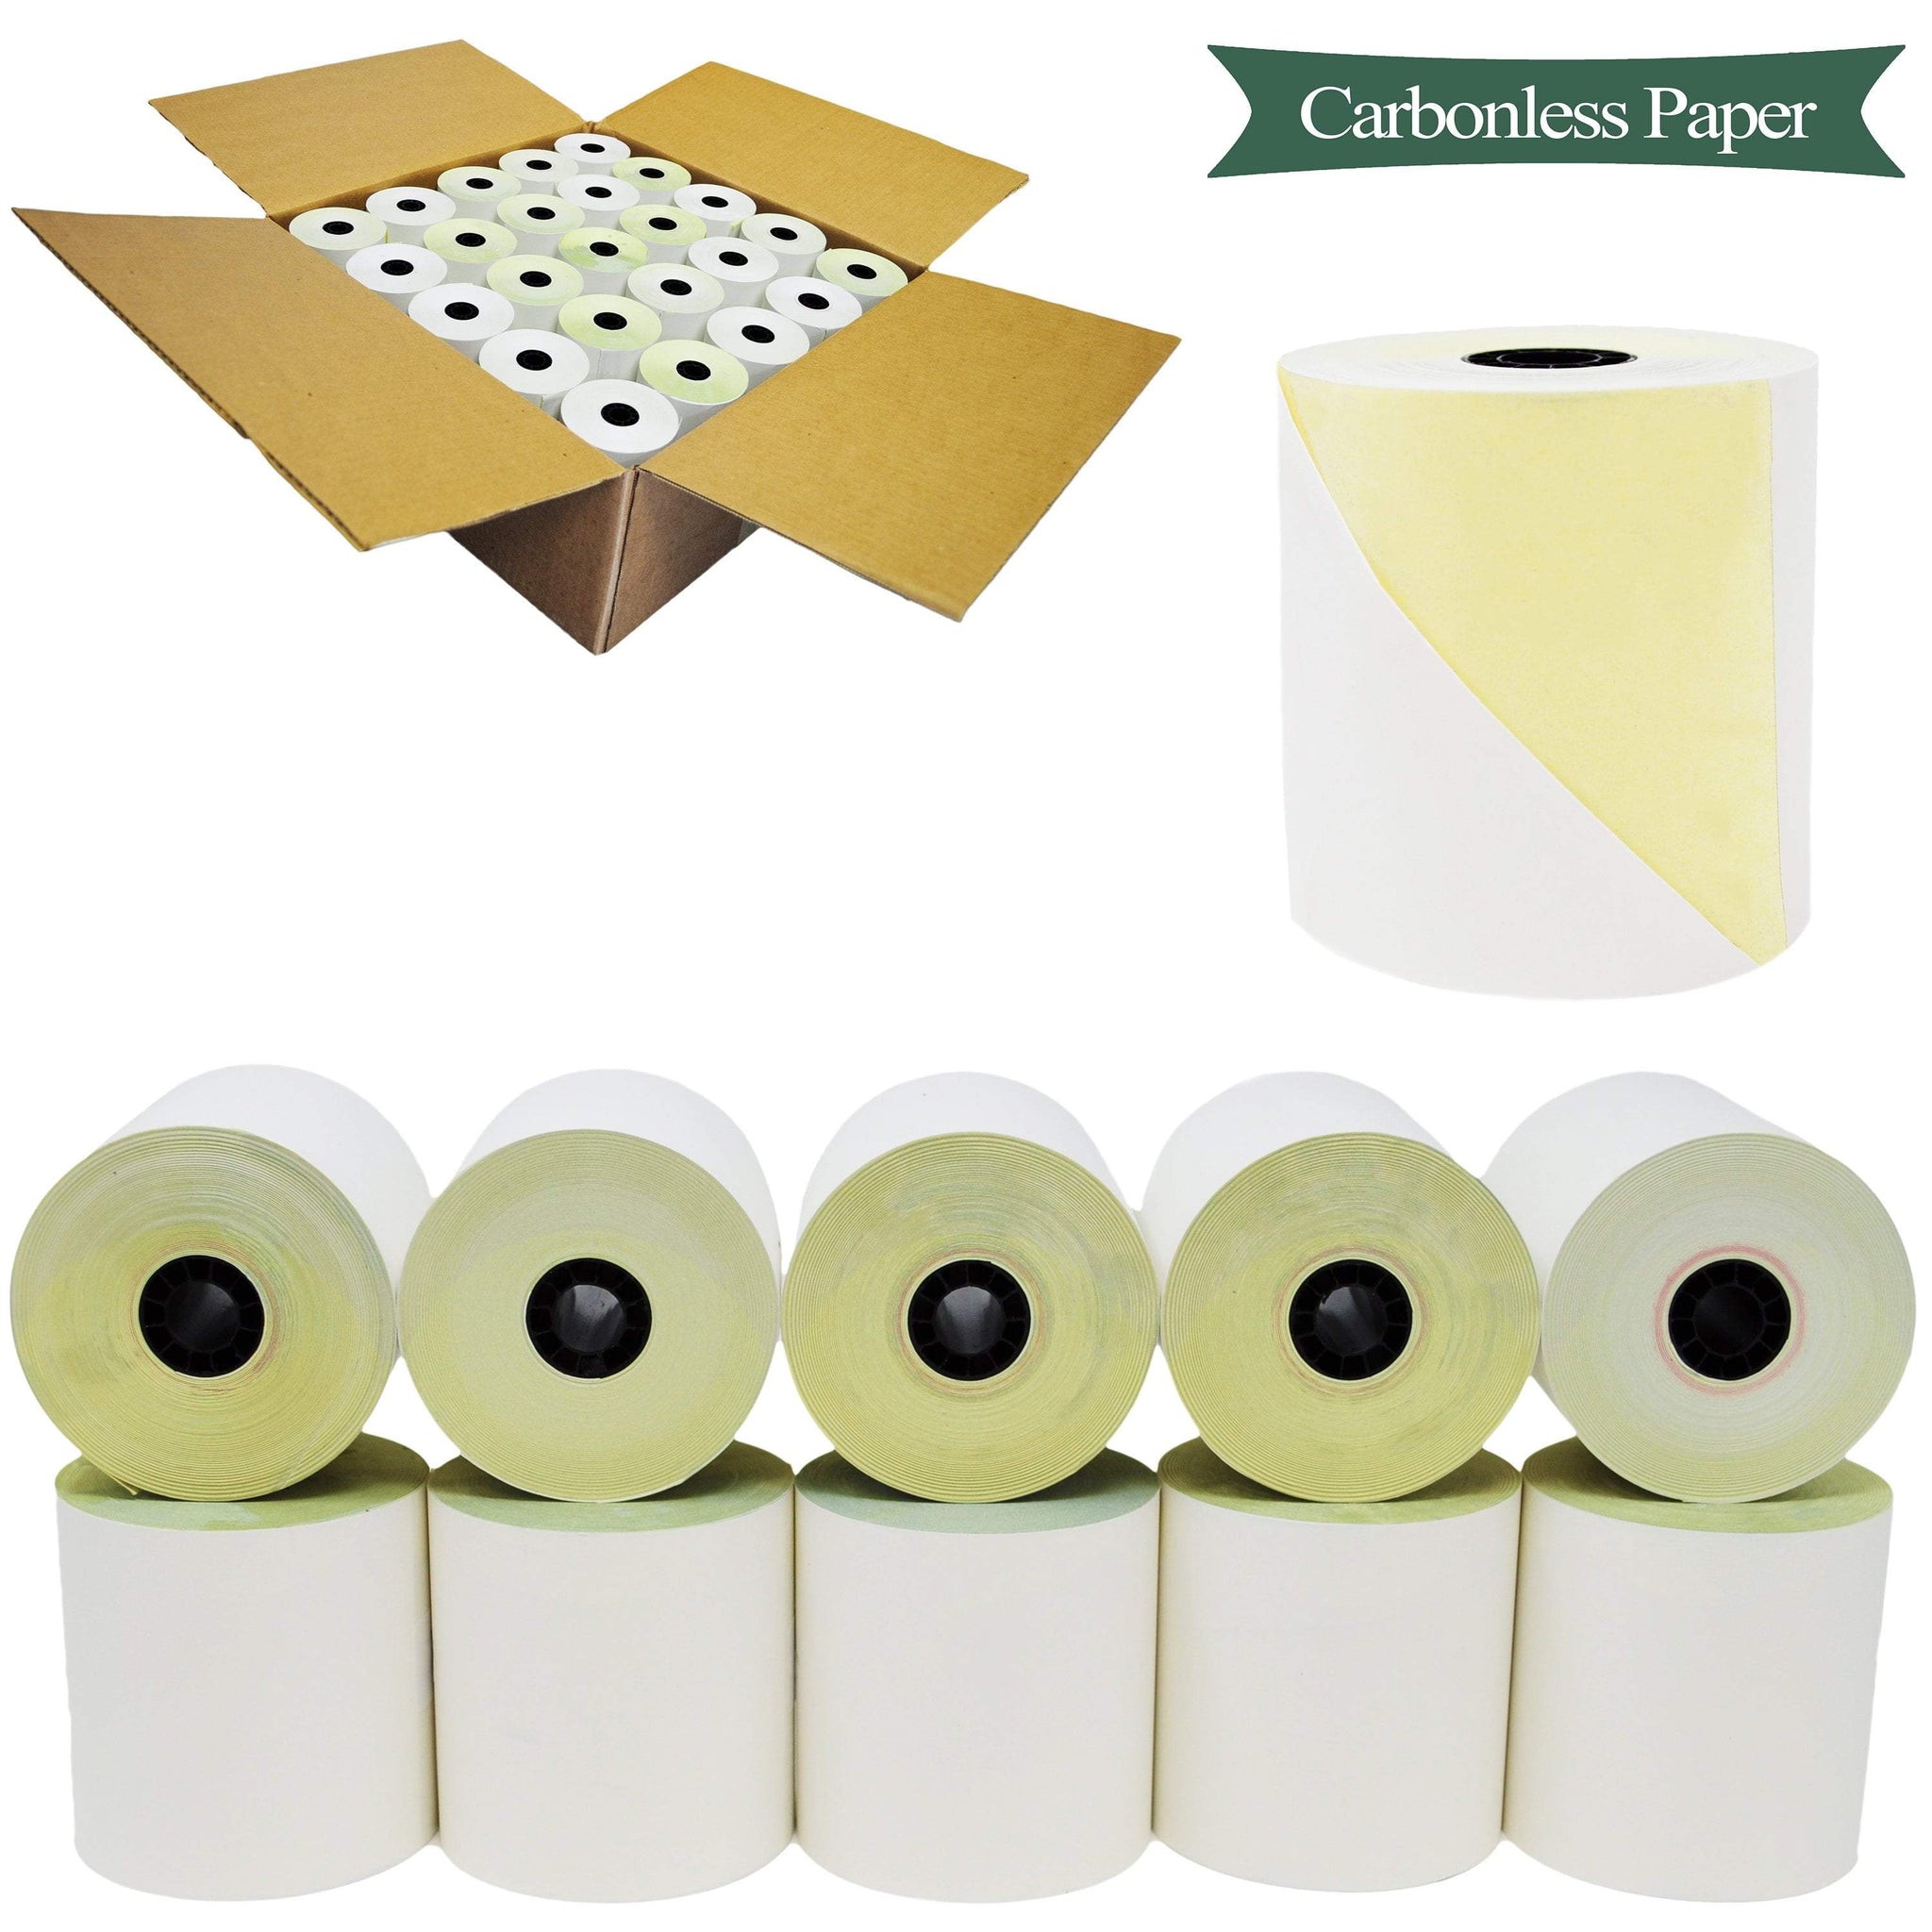 NoteBuddy™ Paper Rolls - 3 Pack – Doodle Dash